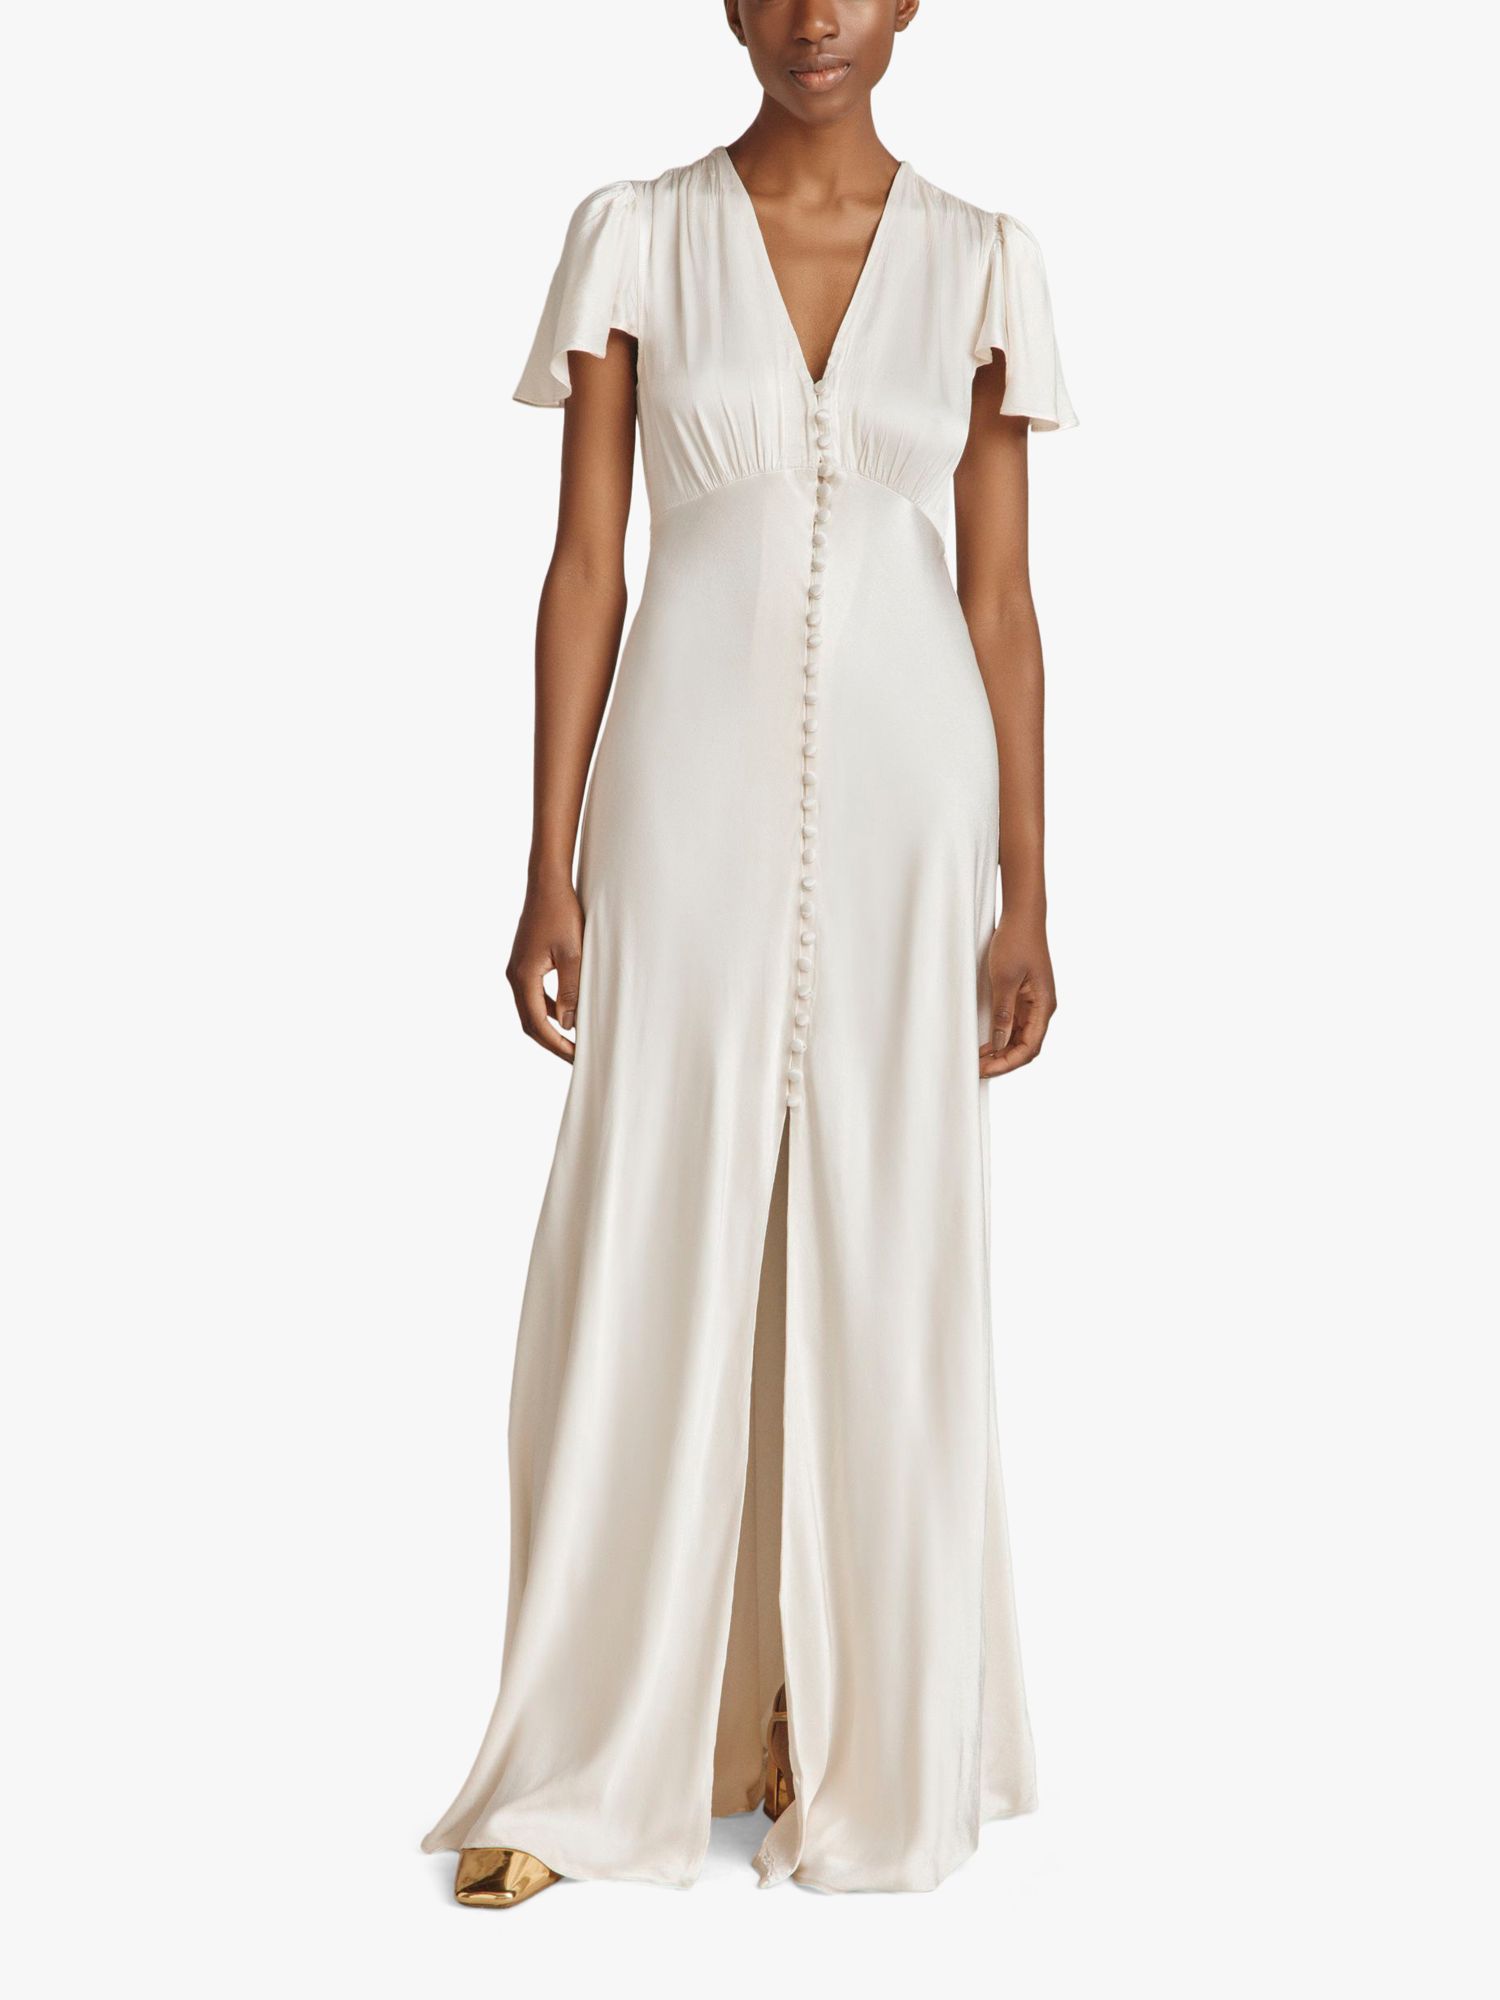 Ghost Delphine Satin Maxi Dress, Ivory at John Lewis & Partners